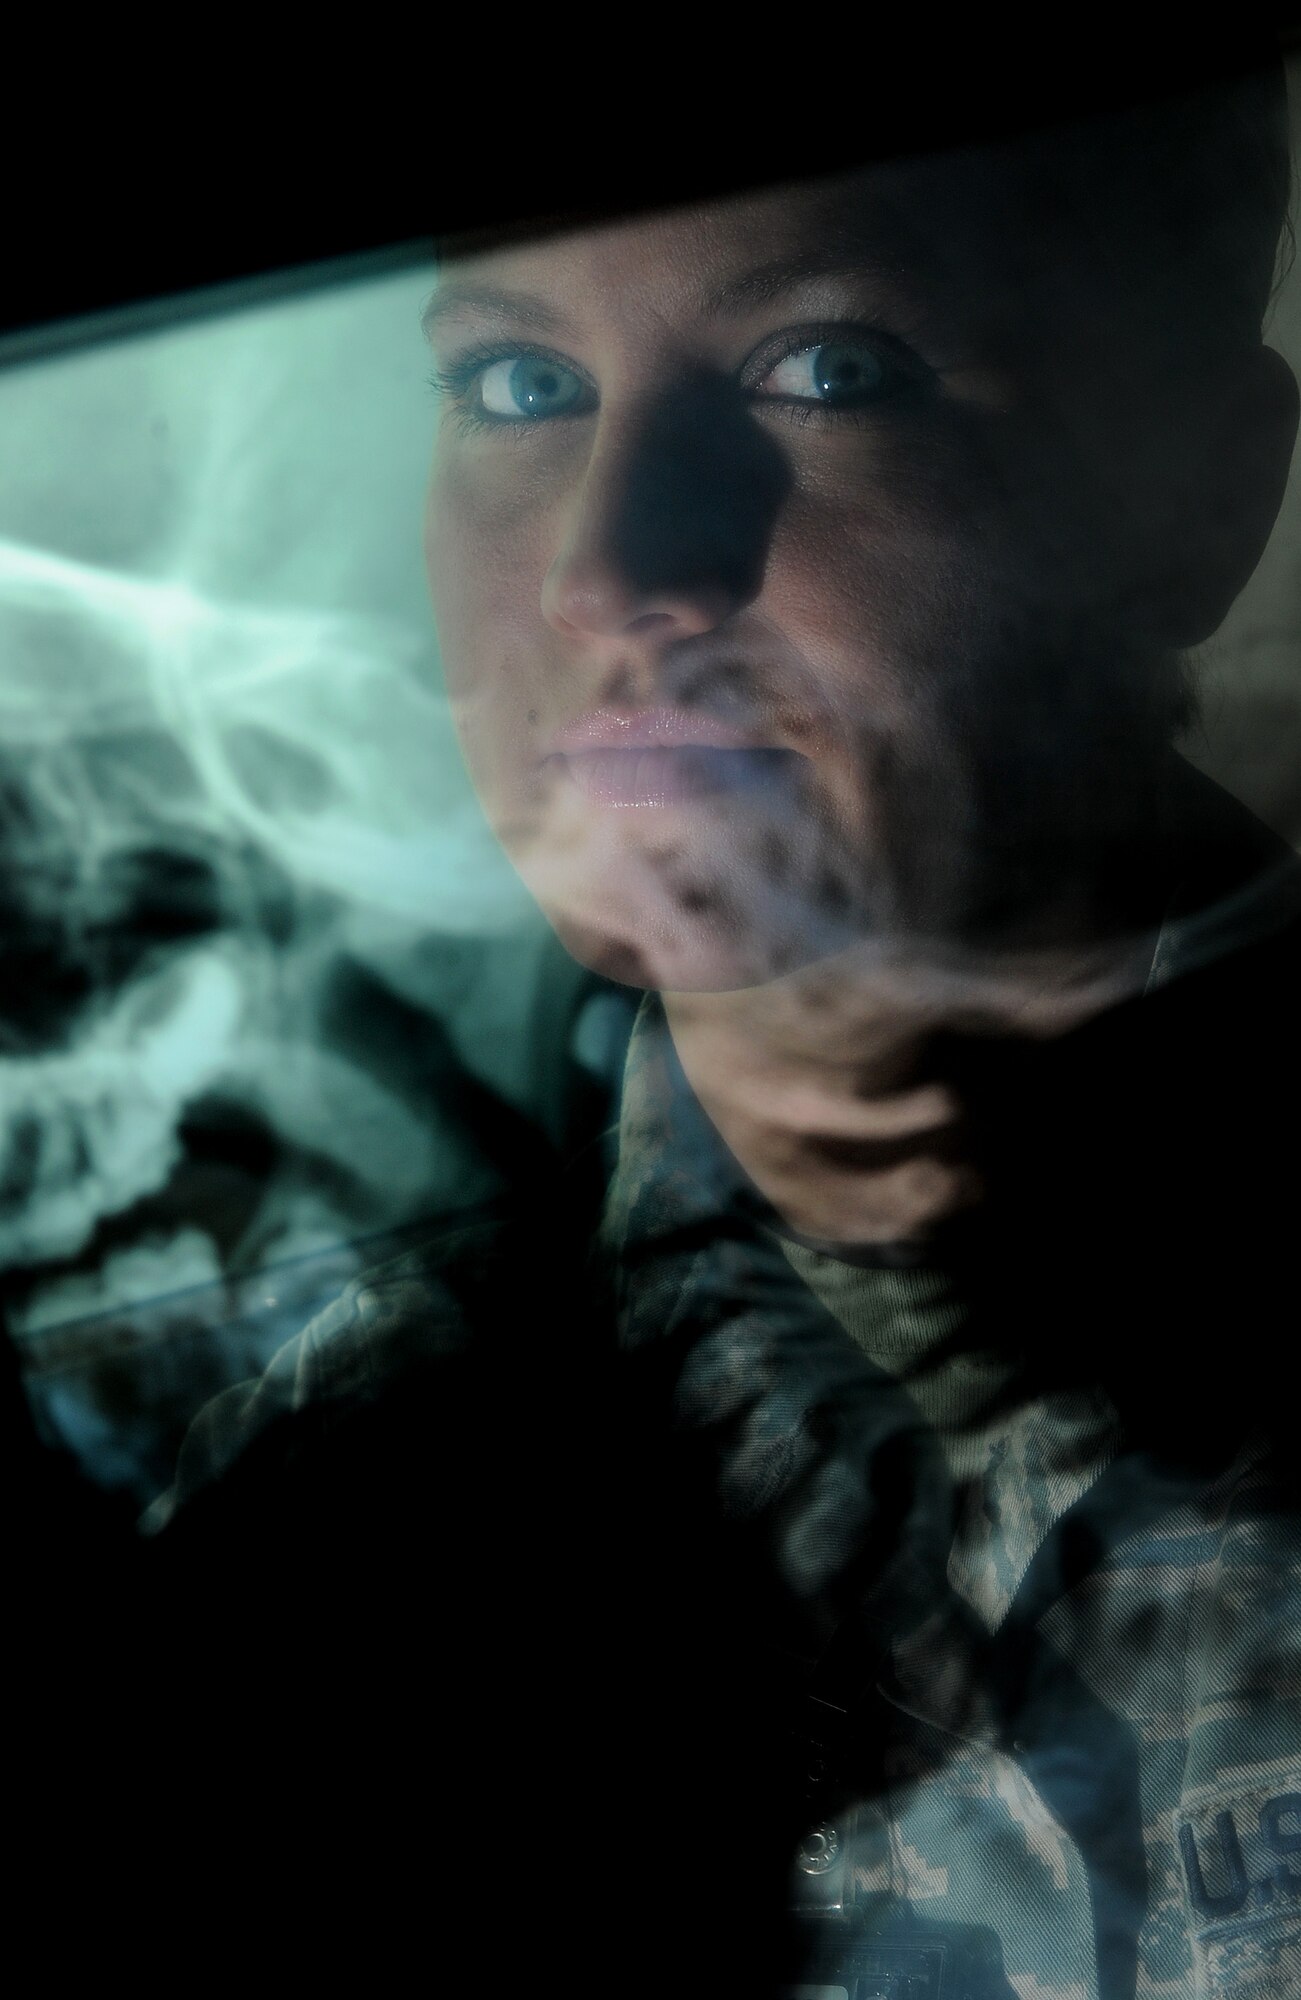 Staff Sgt Carla Hisghman, 5th Medical Support Squadron radiology technologist, views an x-ray of a human skull at Minot Air Force Base, N.D., Oct. 29, 2013. X-rays are a form of radiograph which shows the organs and bones of the human body superimposed over each other with bones appearing whiter and more solid than soft tissues. (U.S. Air Force photo/Senior Airman Stephanie Sauberan)